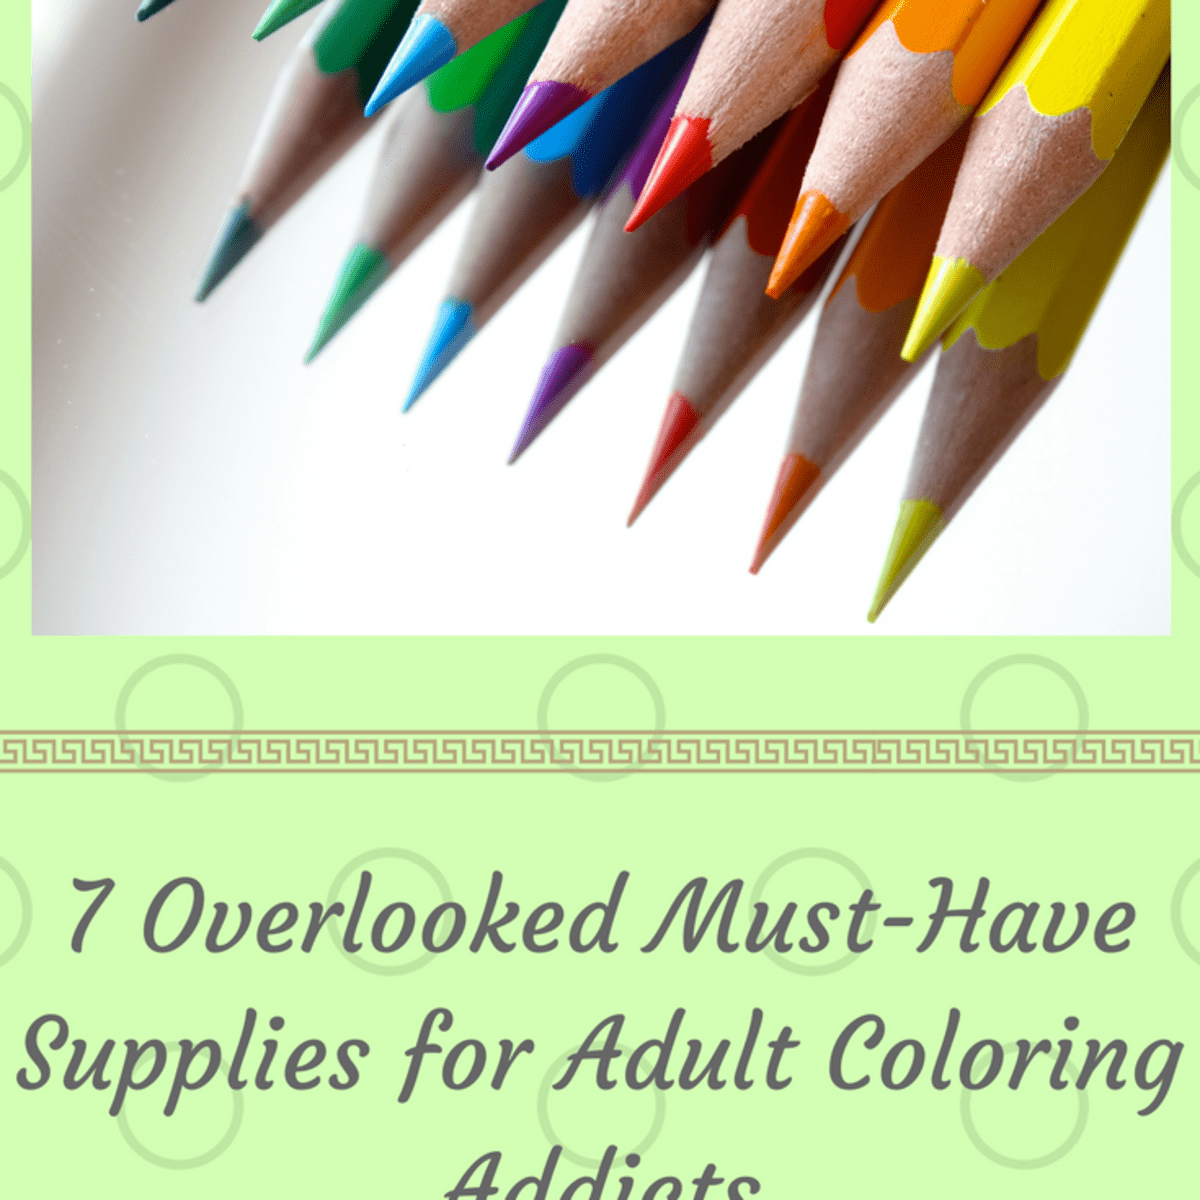 Best Colored Pencils-Adult Coloring Supplies for Coloring Book Addicts